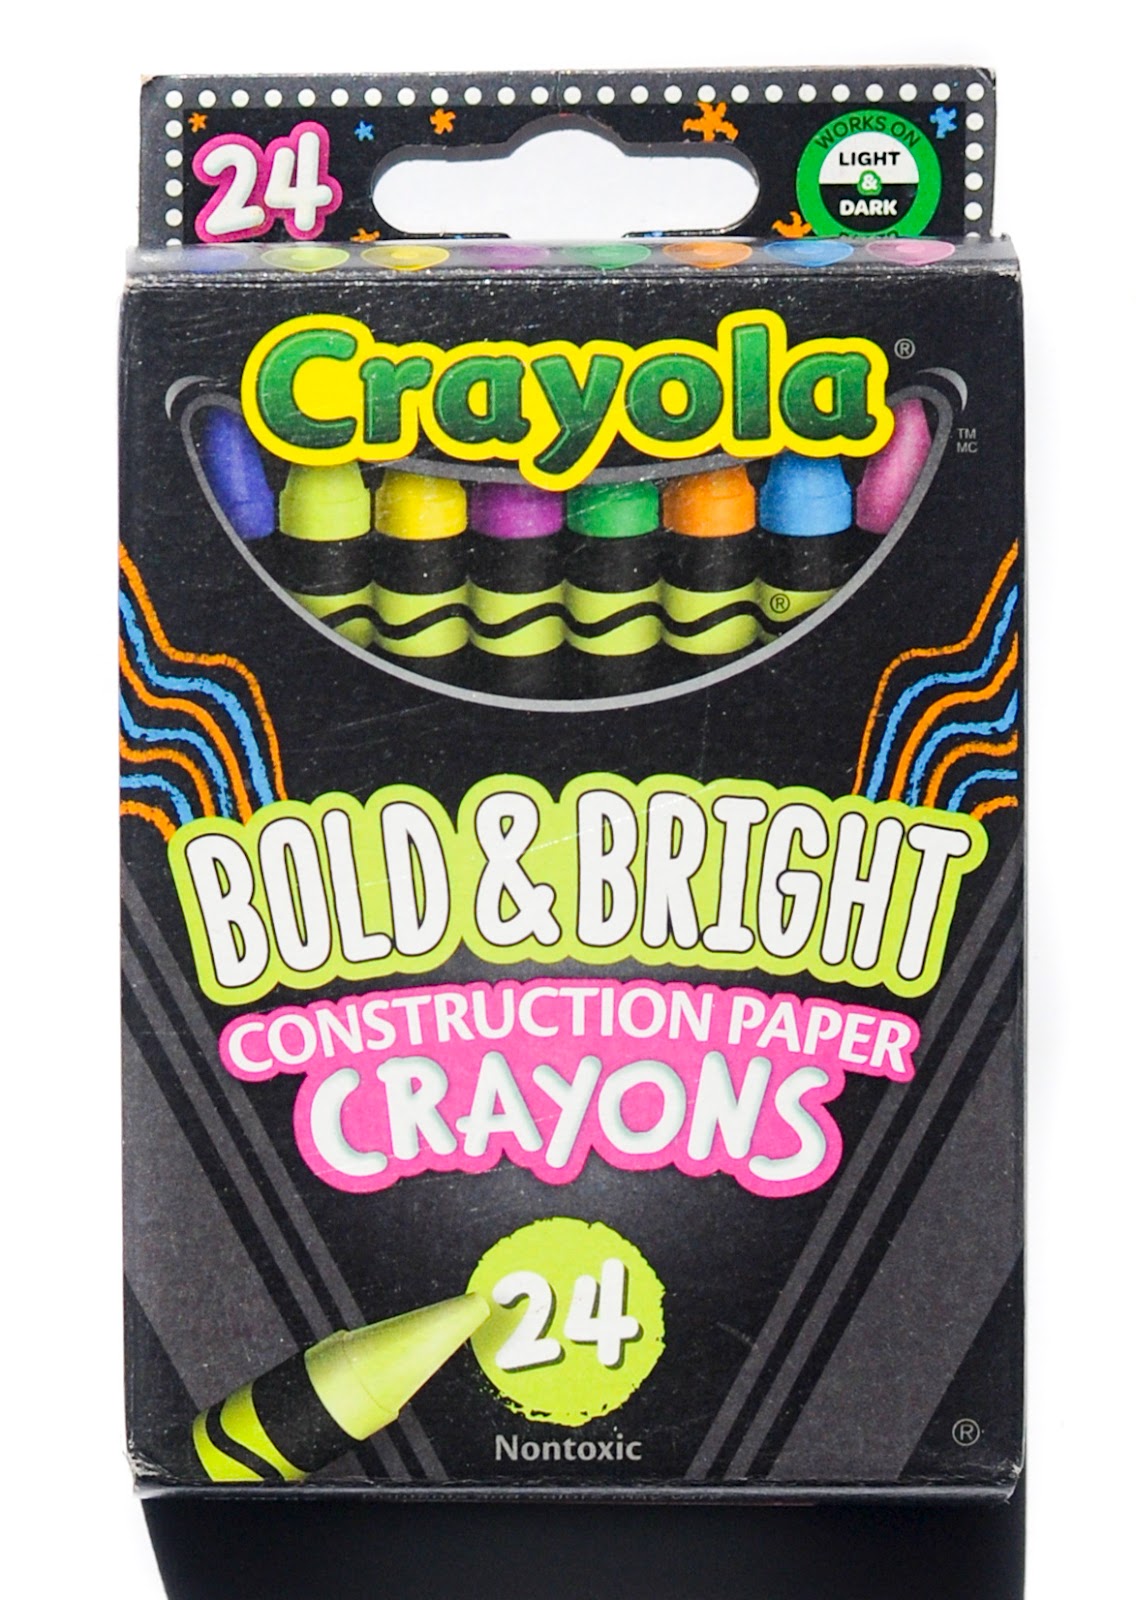 Crayola Colors of the World Markers /24 - J&J Crafts